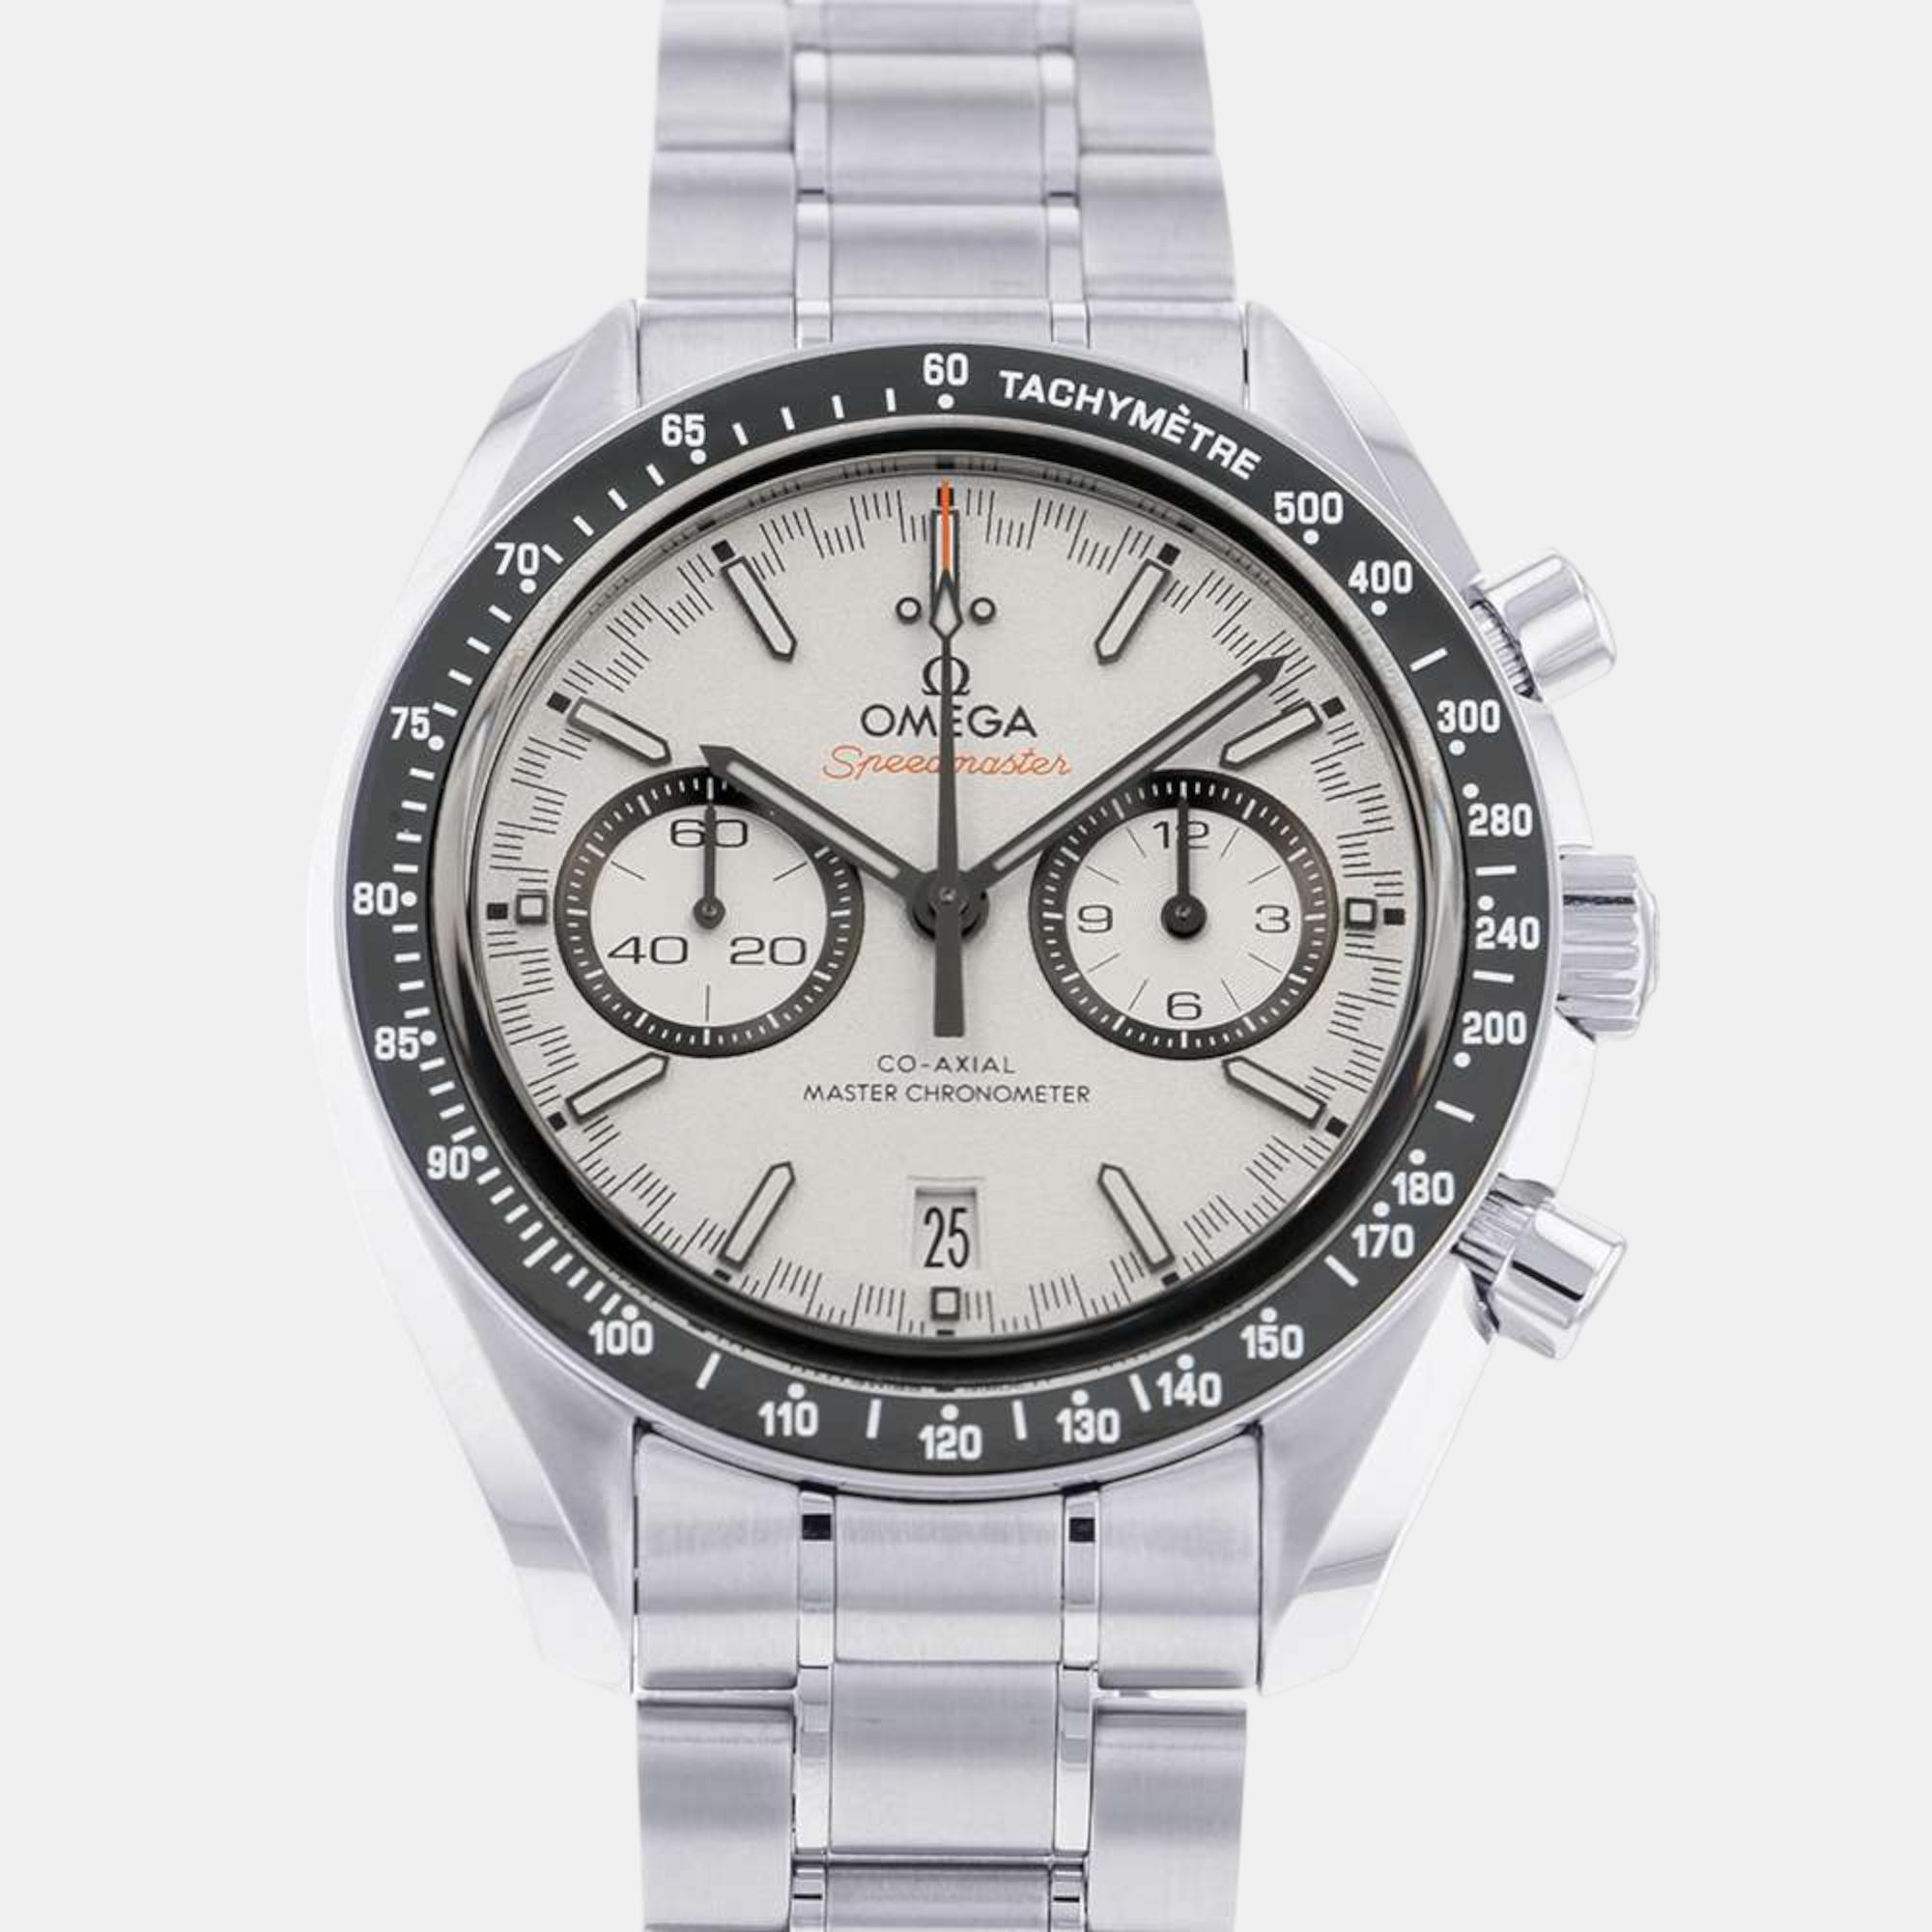 Omega White Stainless Steel Speedmaster 329.30.44.51.04.001 Automatic Men's Wristwatch 44 Mm